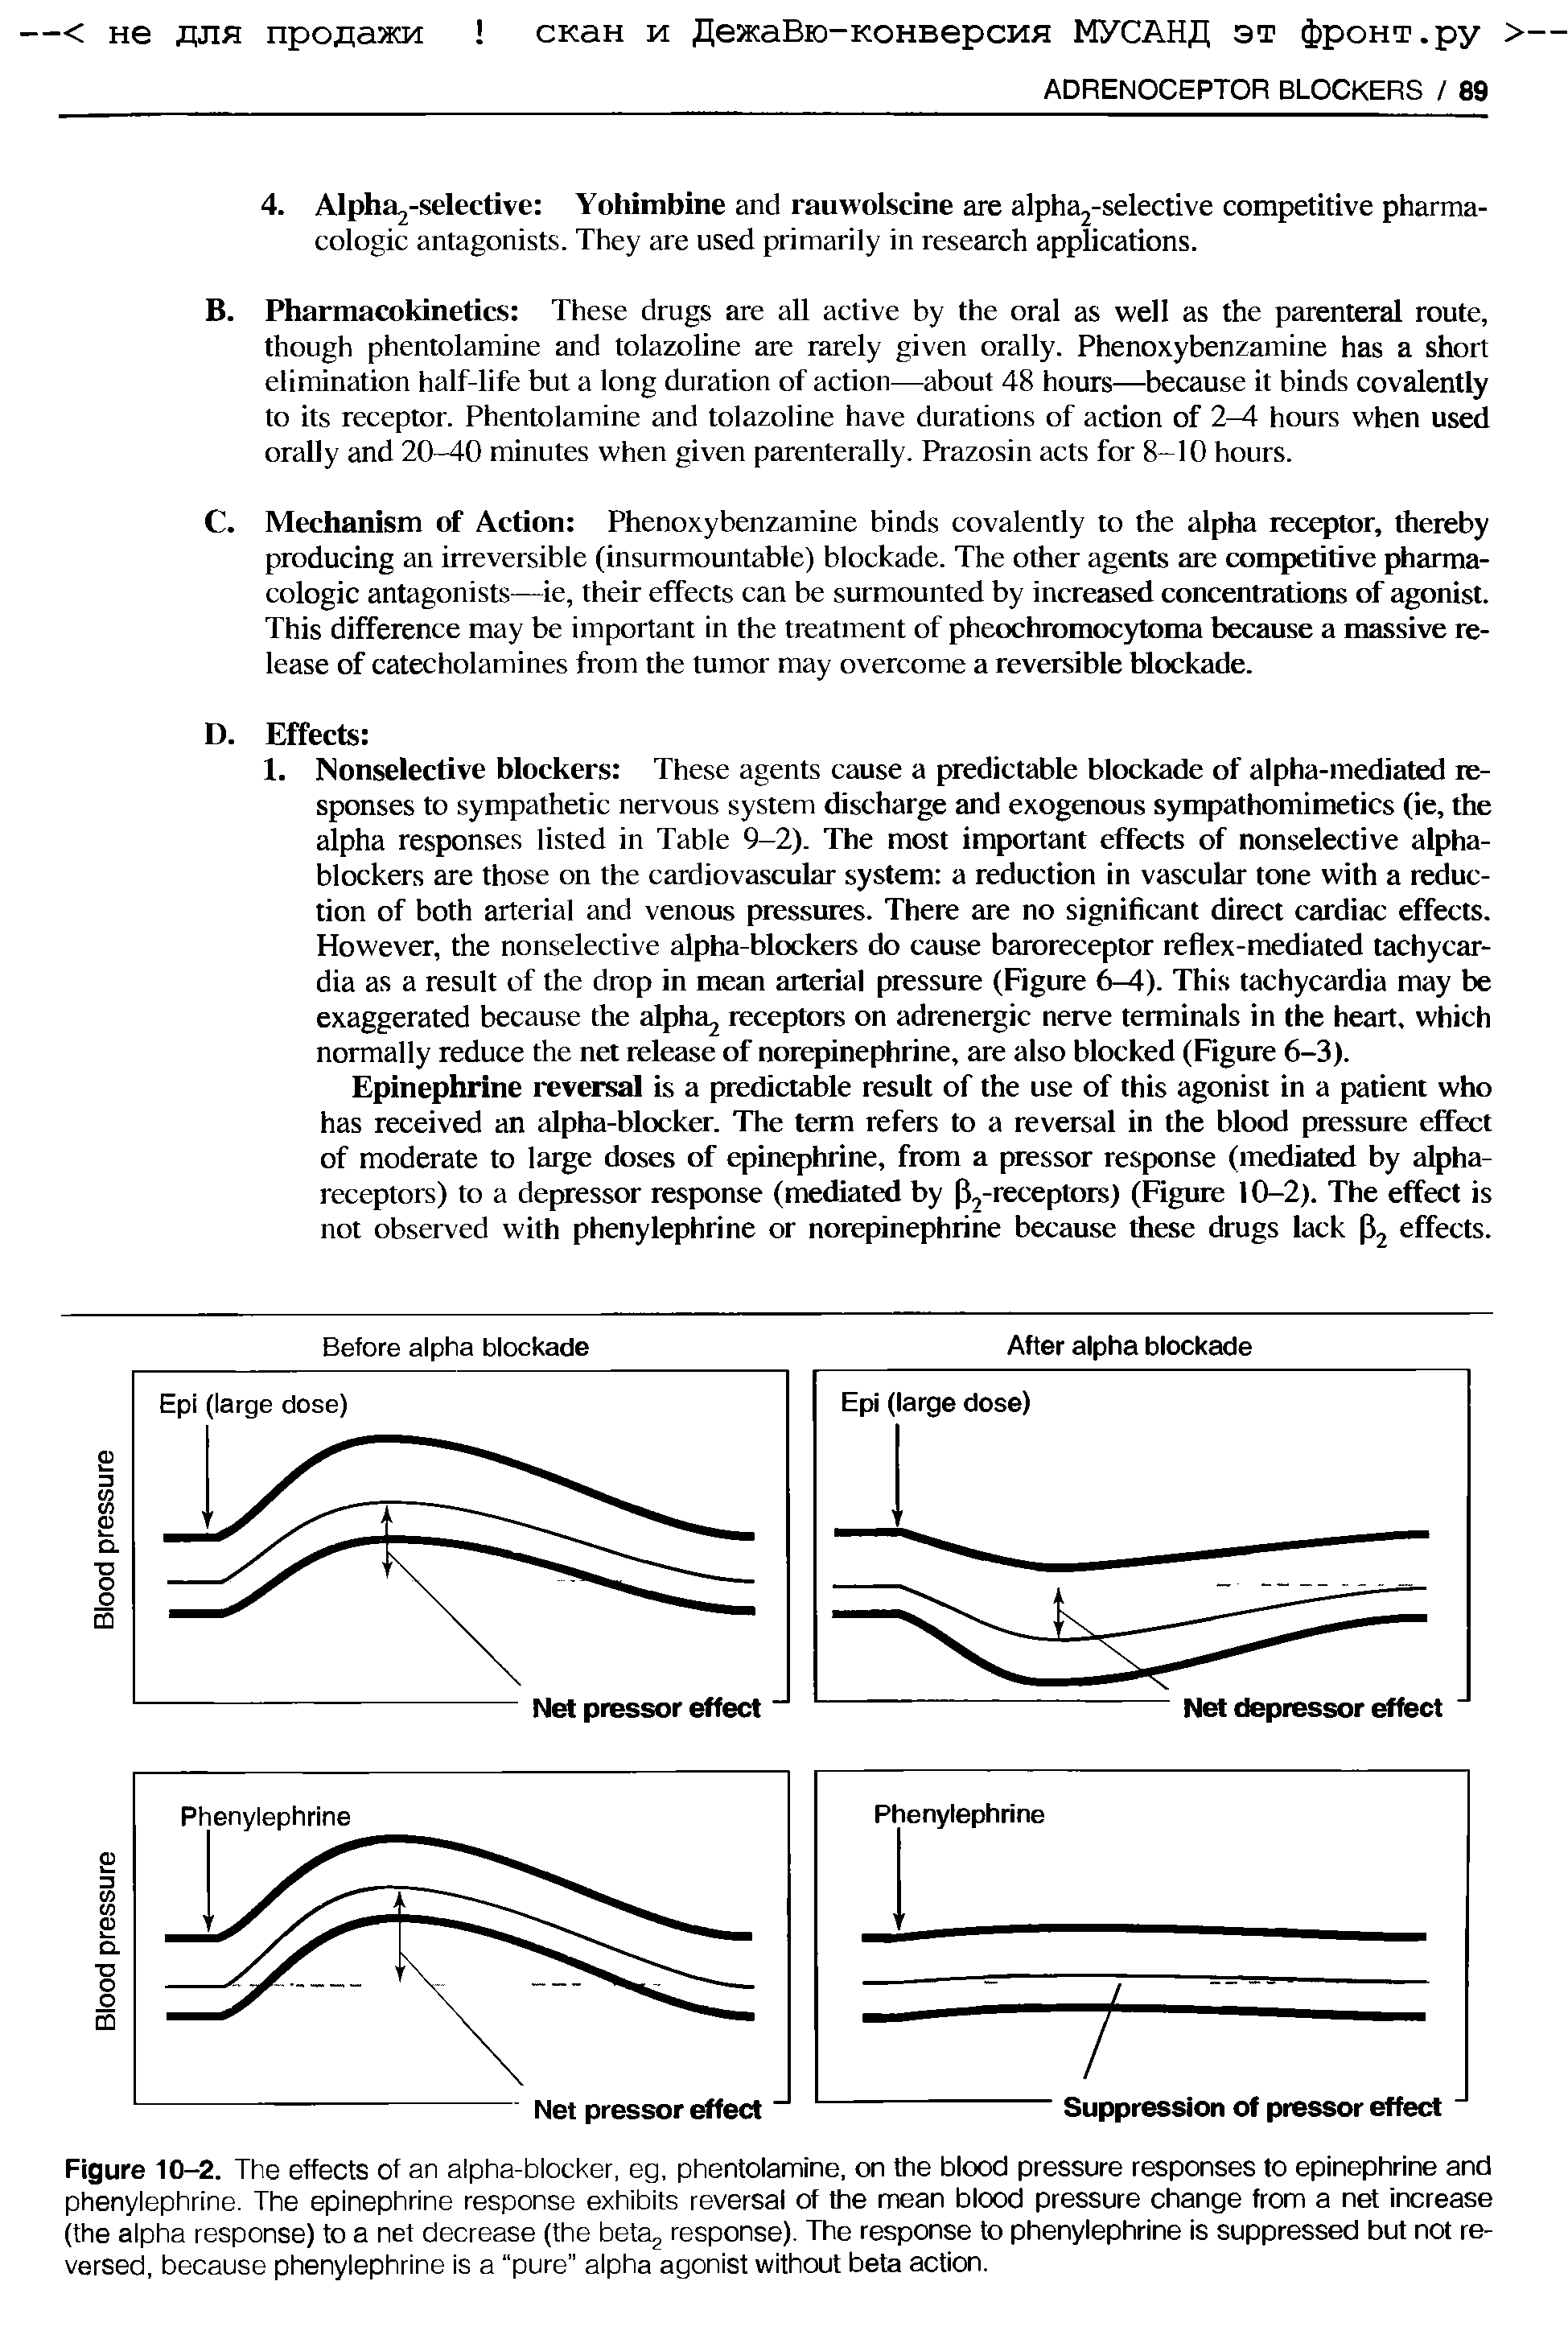 Figure 10-2. The effects of an alpha-blocker, eg, phentolamine, on the blood pressure responses to epinephrine and phenylephrine. The epinephrine response exhibits reversal of the mean blood pressure change from a net increase (the alpha response) to a net decrease (the beta response). The response to phenylephrine is suppressed but not reversed, because phenylephrine is a pure" alpha agonist without beta action.